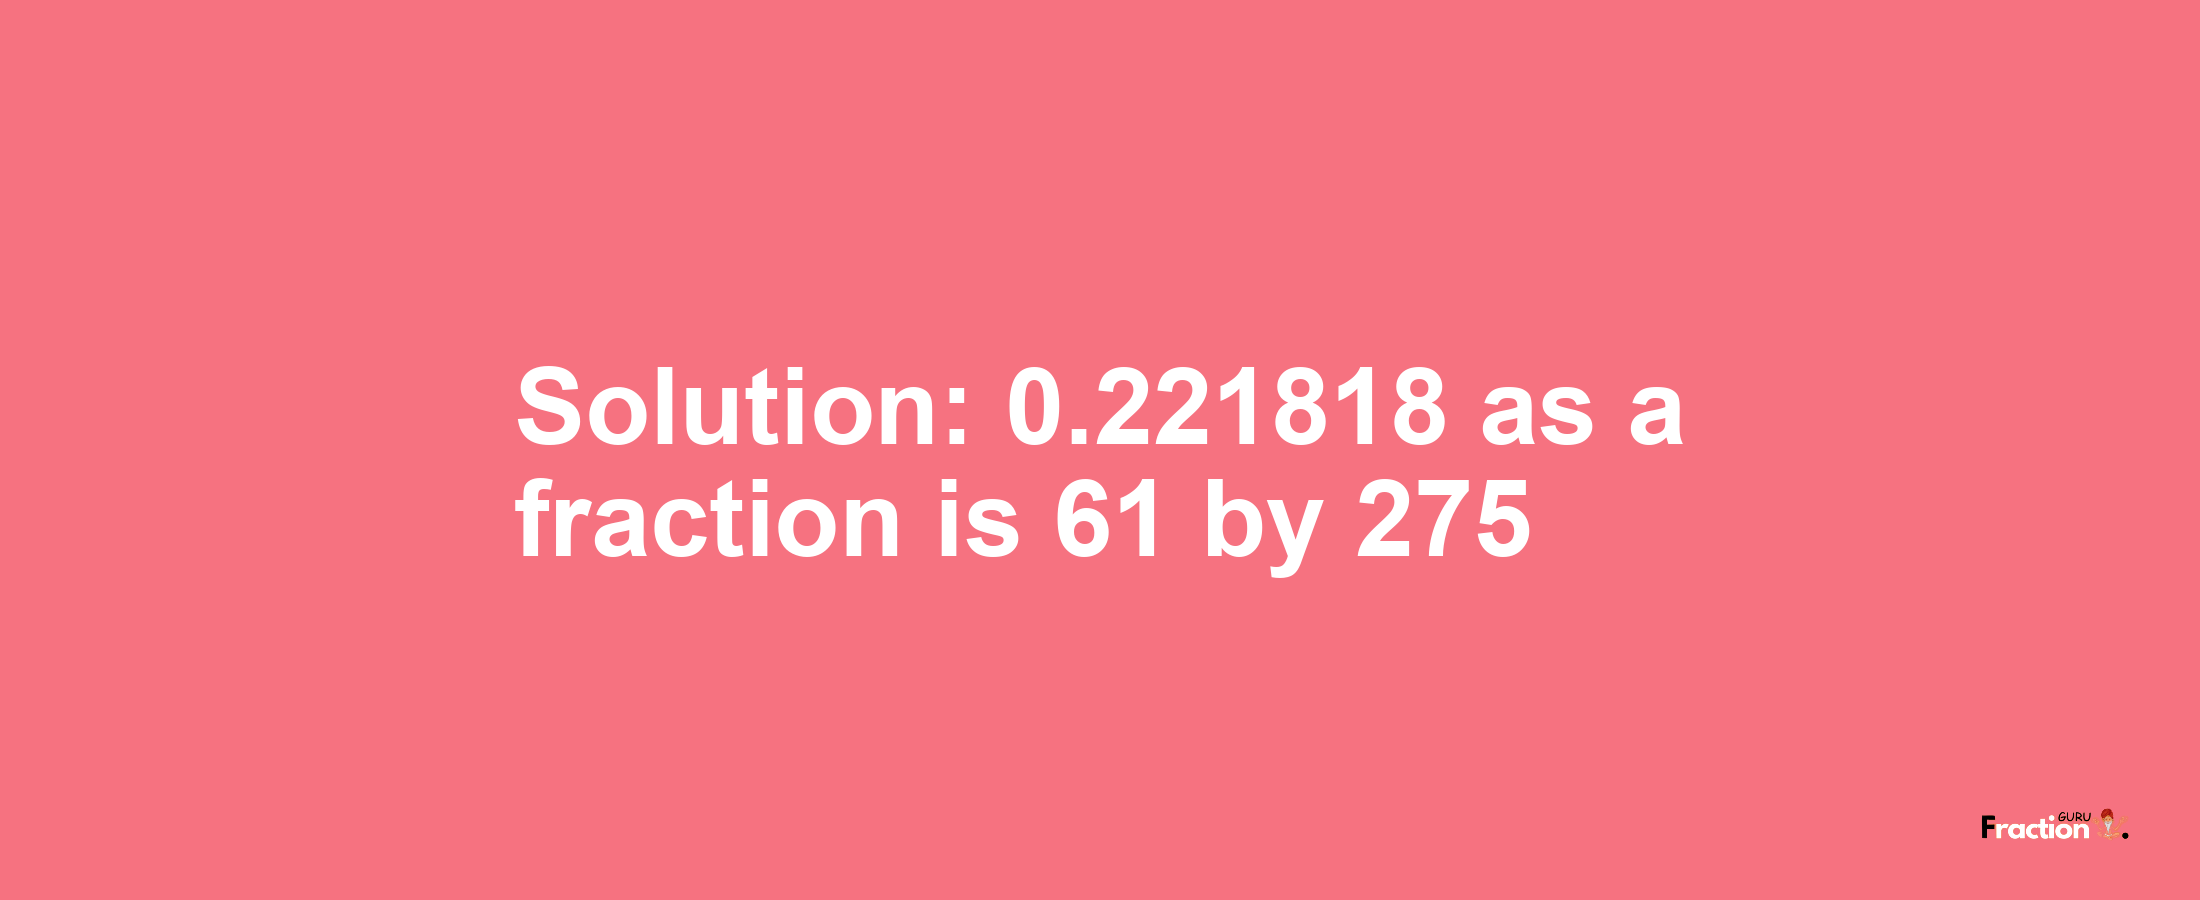 Solution:0.221818 as a fraction is 61/275